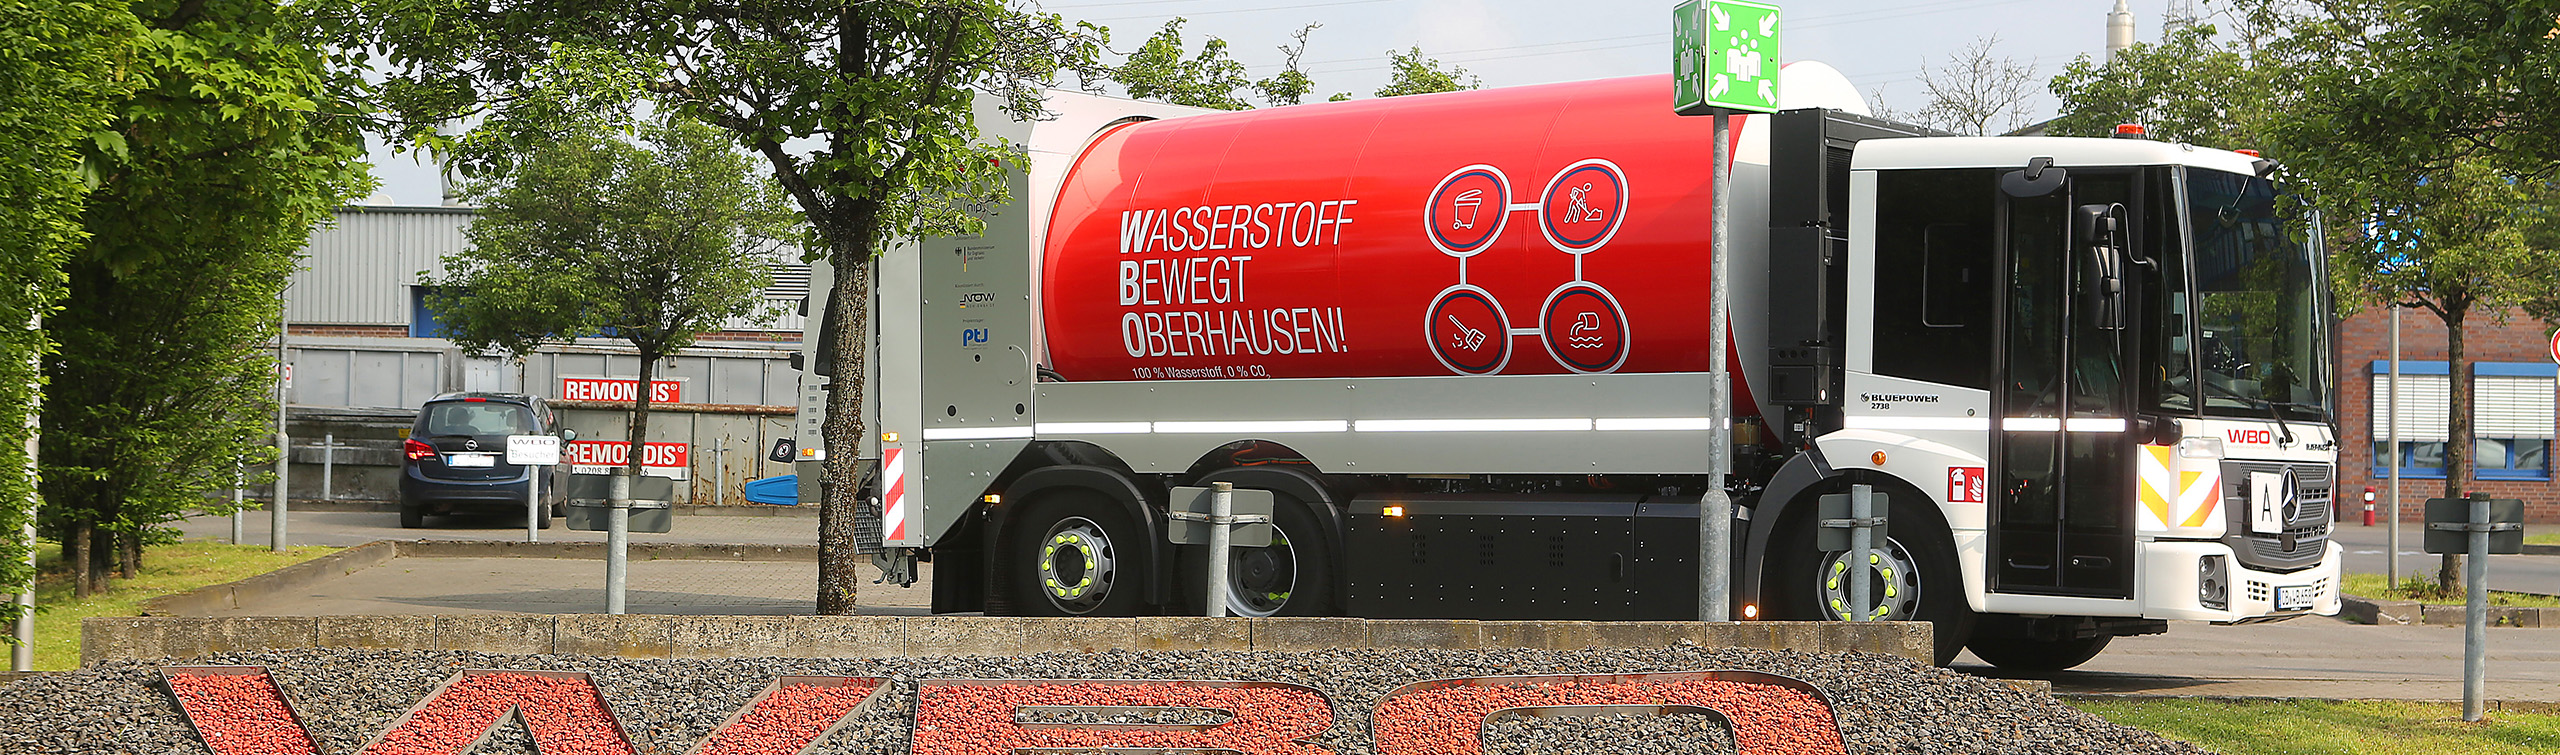 First hydrogen waste collection vehicle for Oberhausen